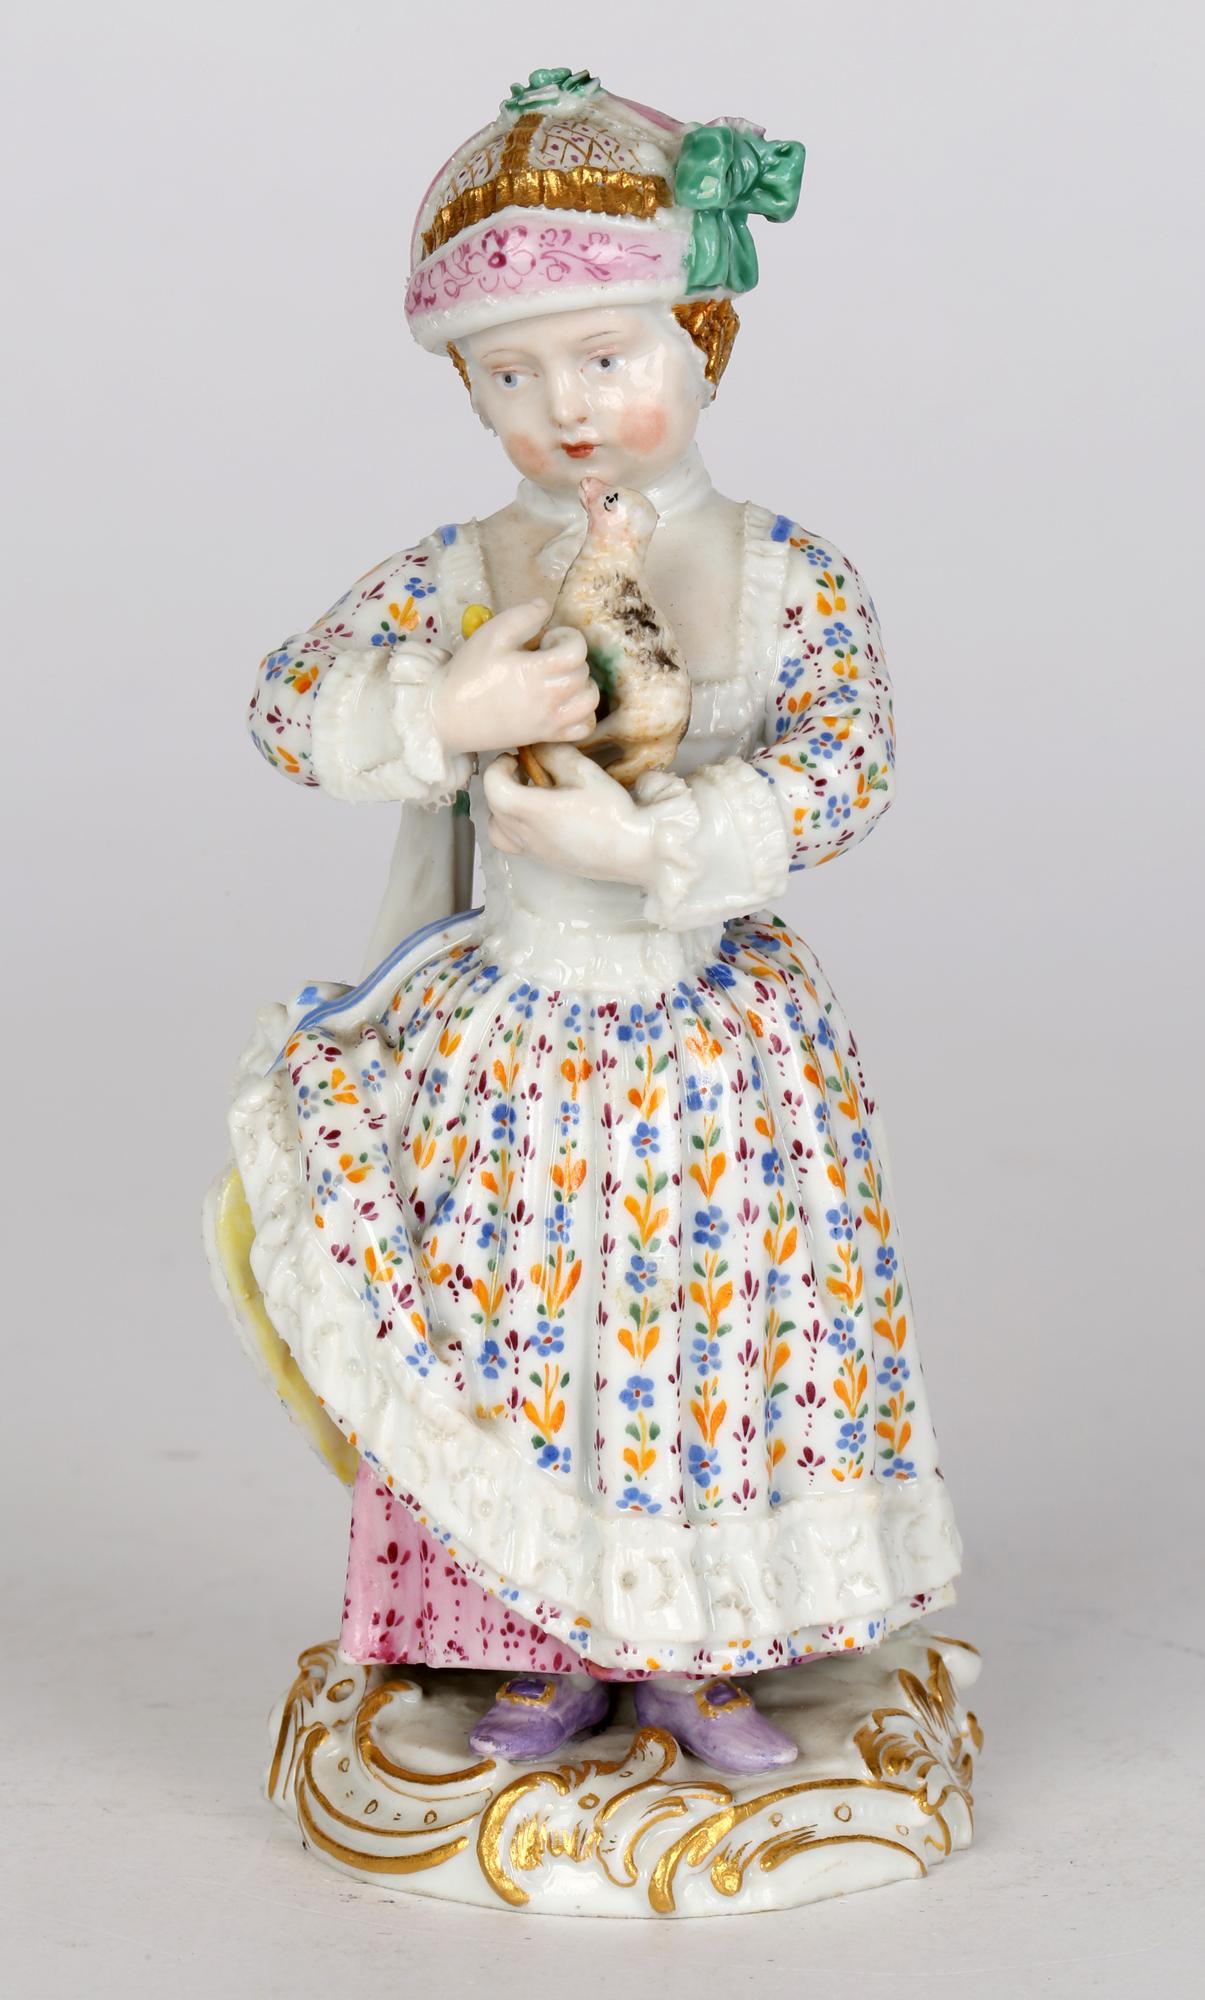 Meissen Porcelain Figurine of a Young Girl Holding a Pull Along Animal Toy 6